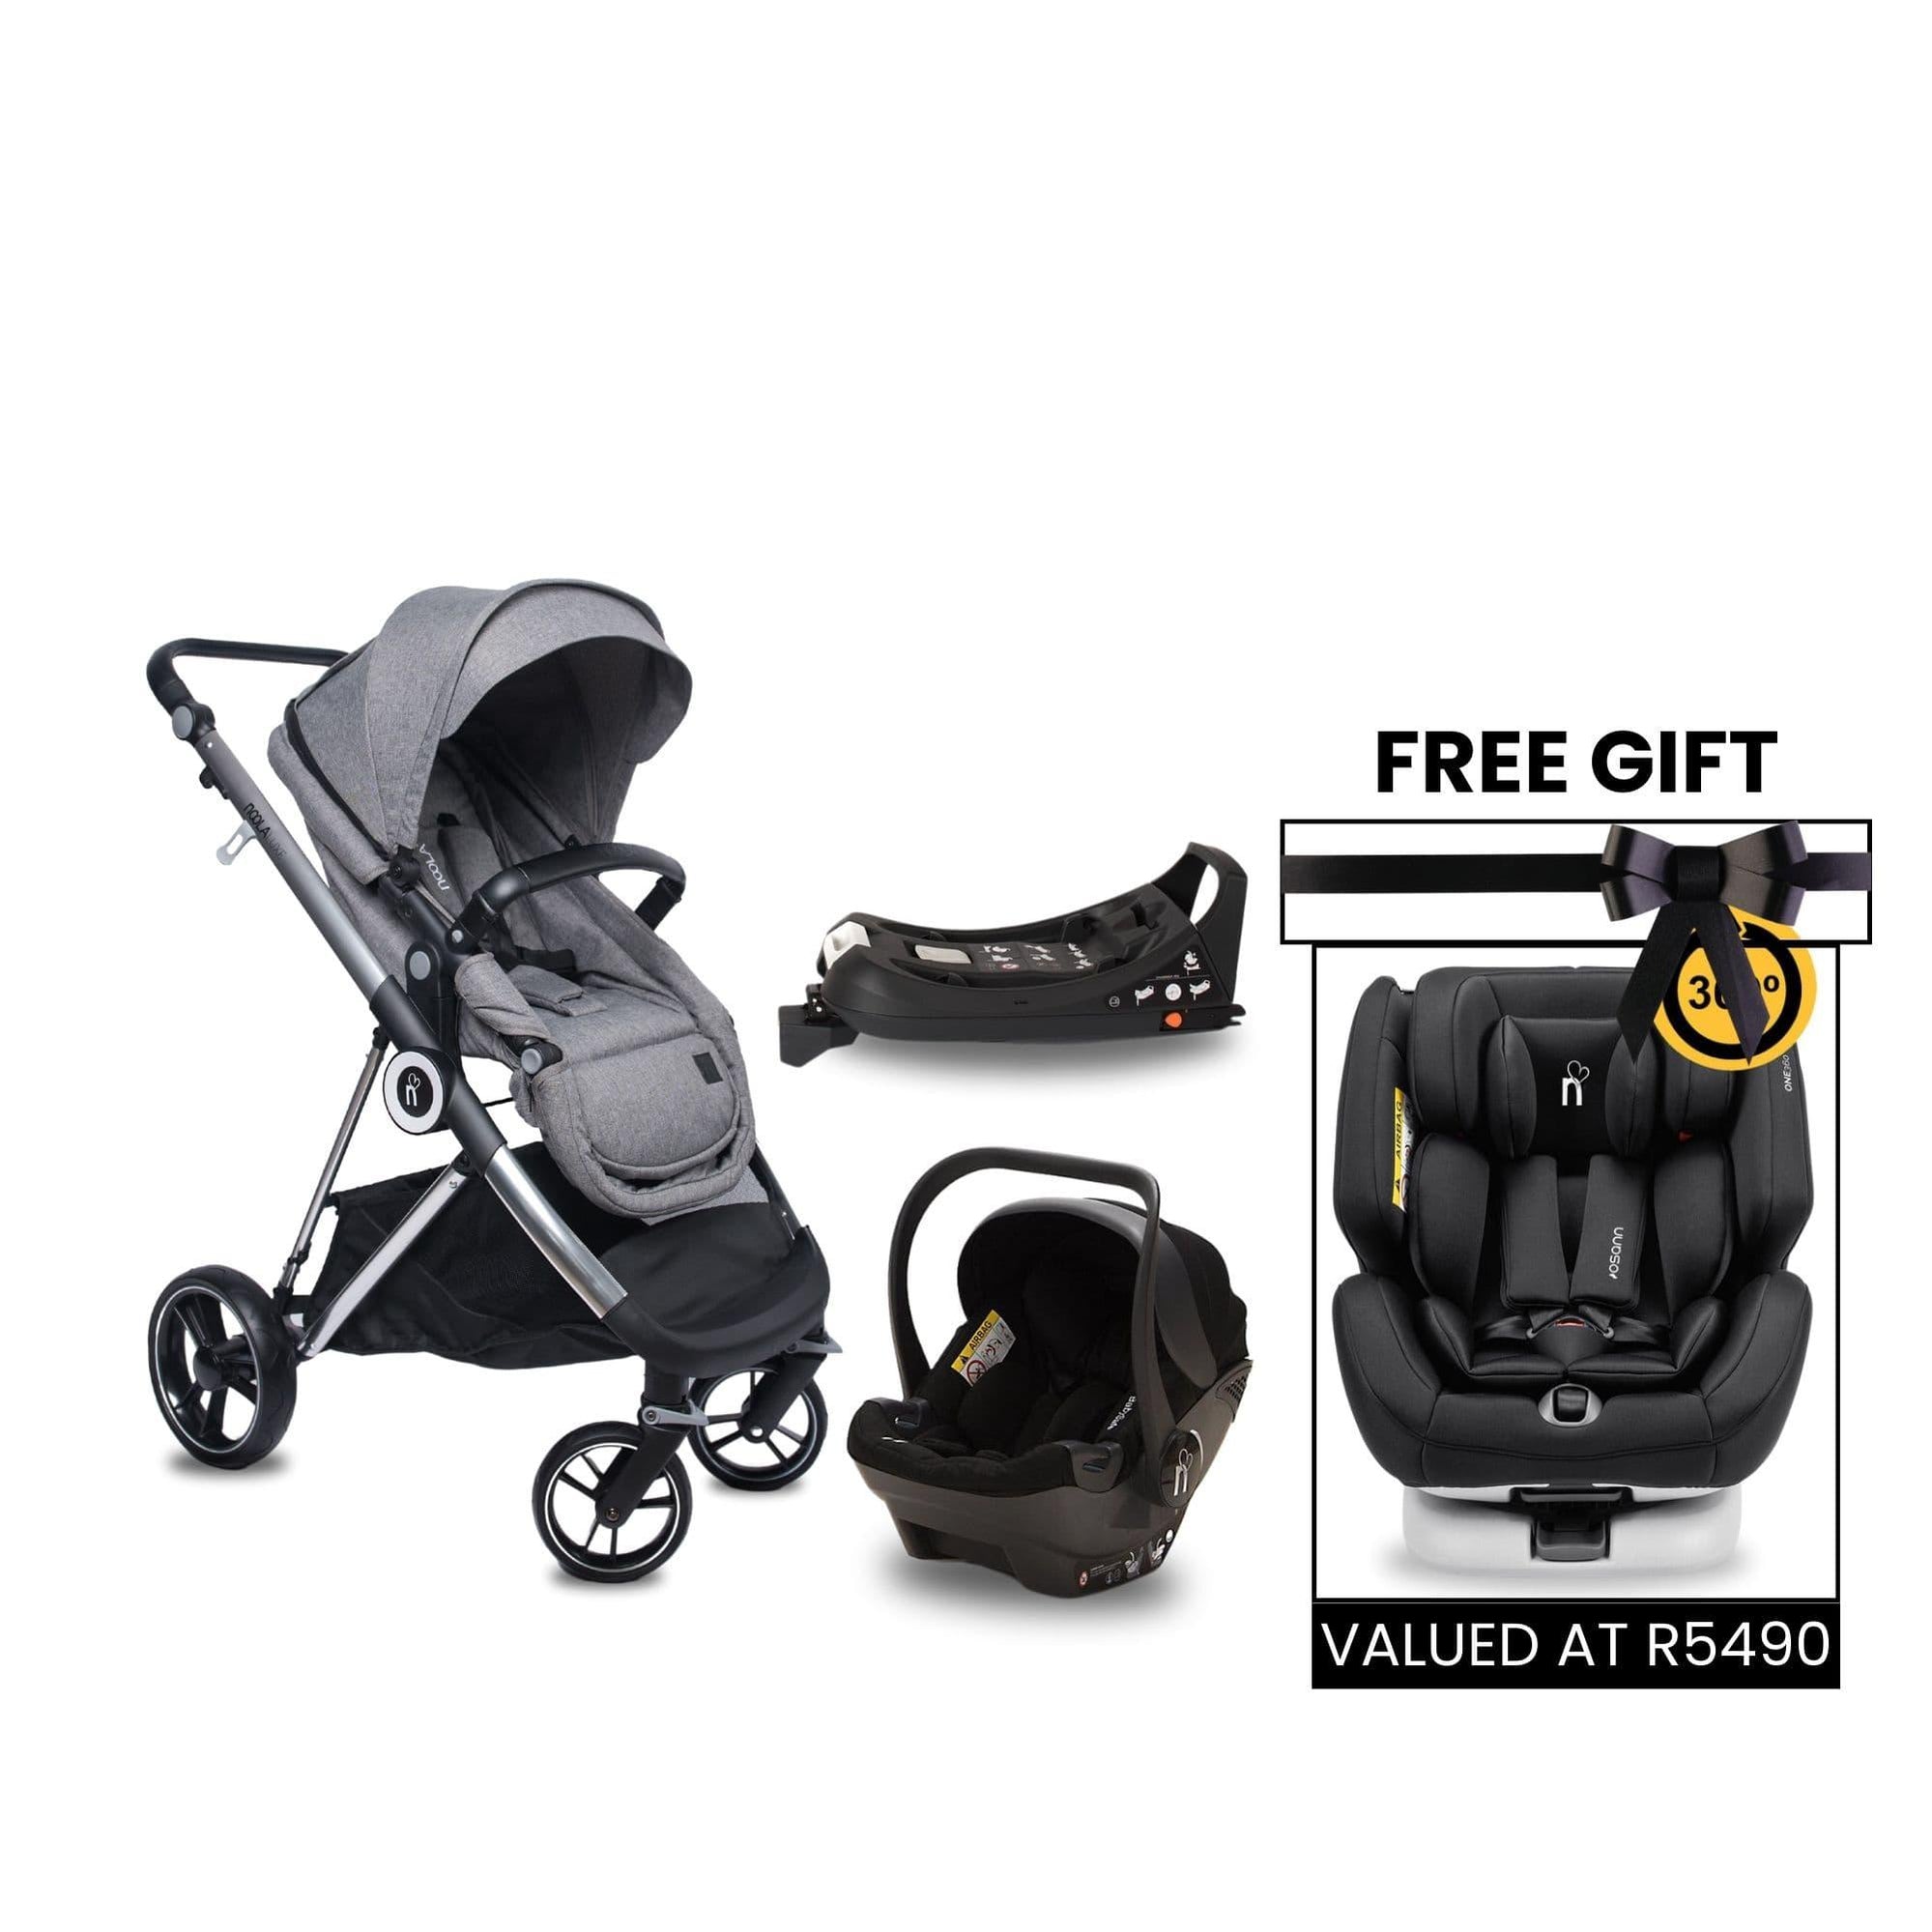 noola luxe baby stroller lunar grey free one360 car seat noola luxe 5in1 baby stroller lunar grey #SELECT THE COLOUR OF YOUR ONE360_ONE360 | MIDNIGHT BLACK